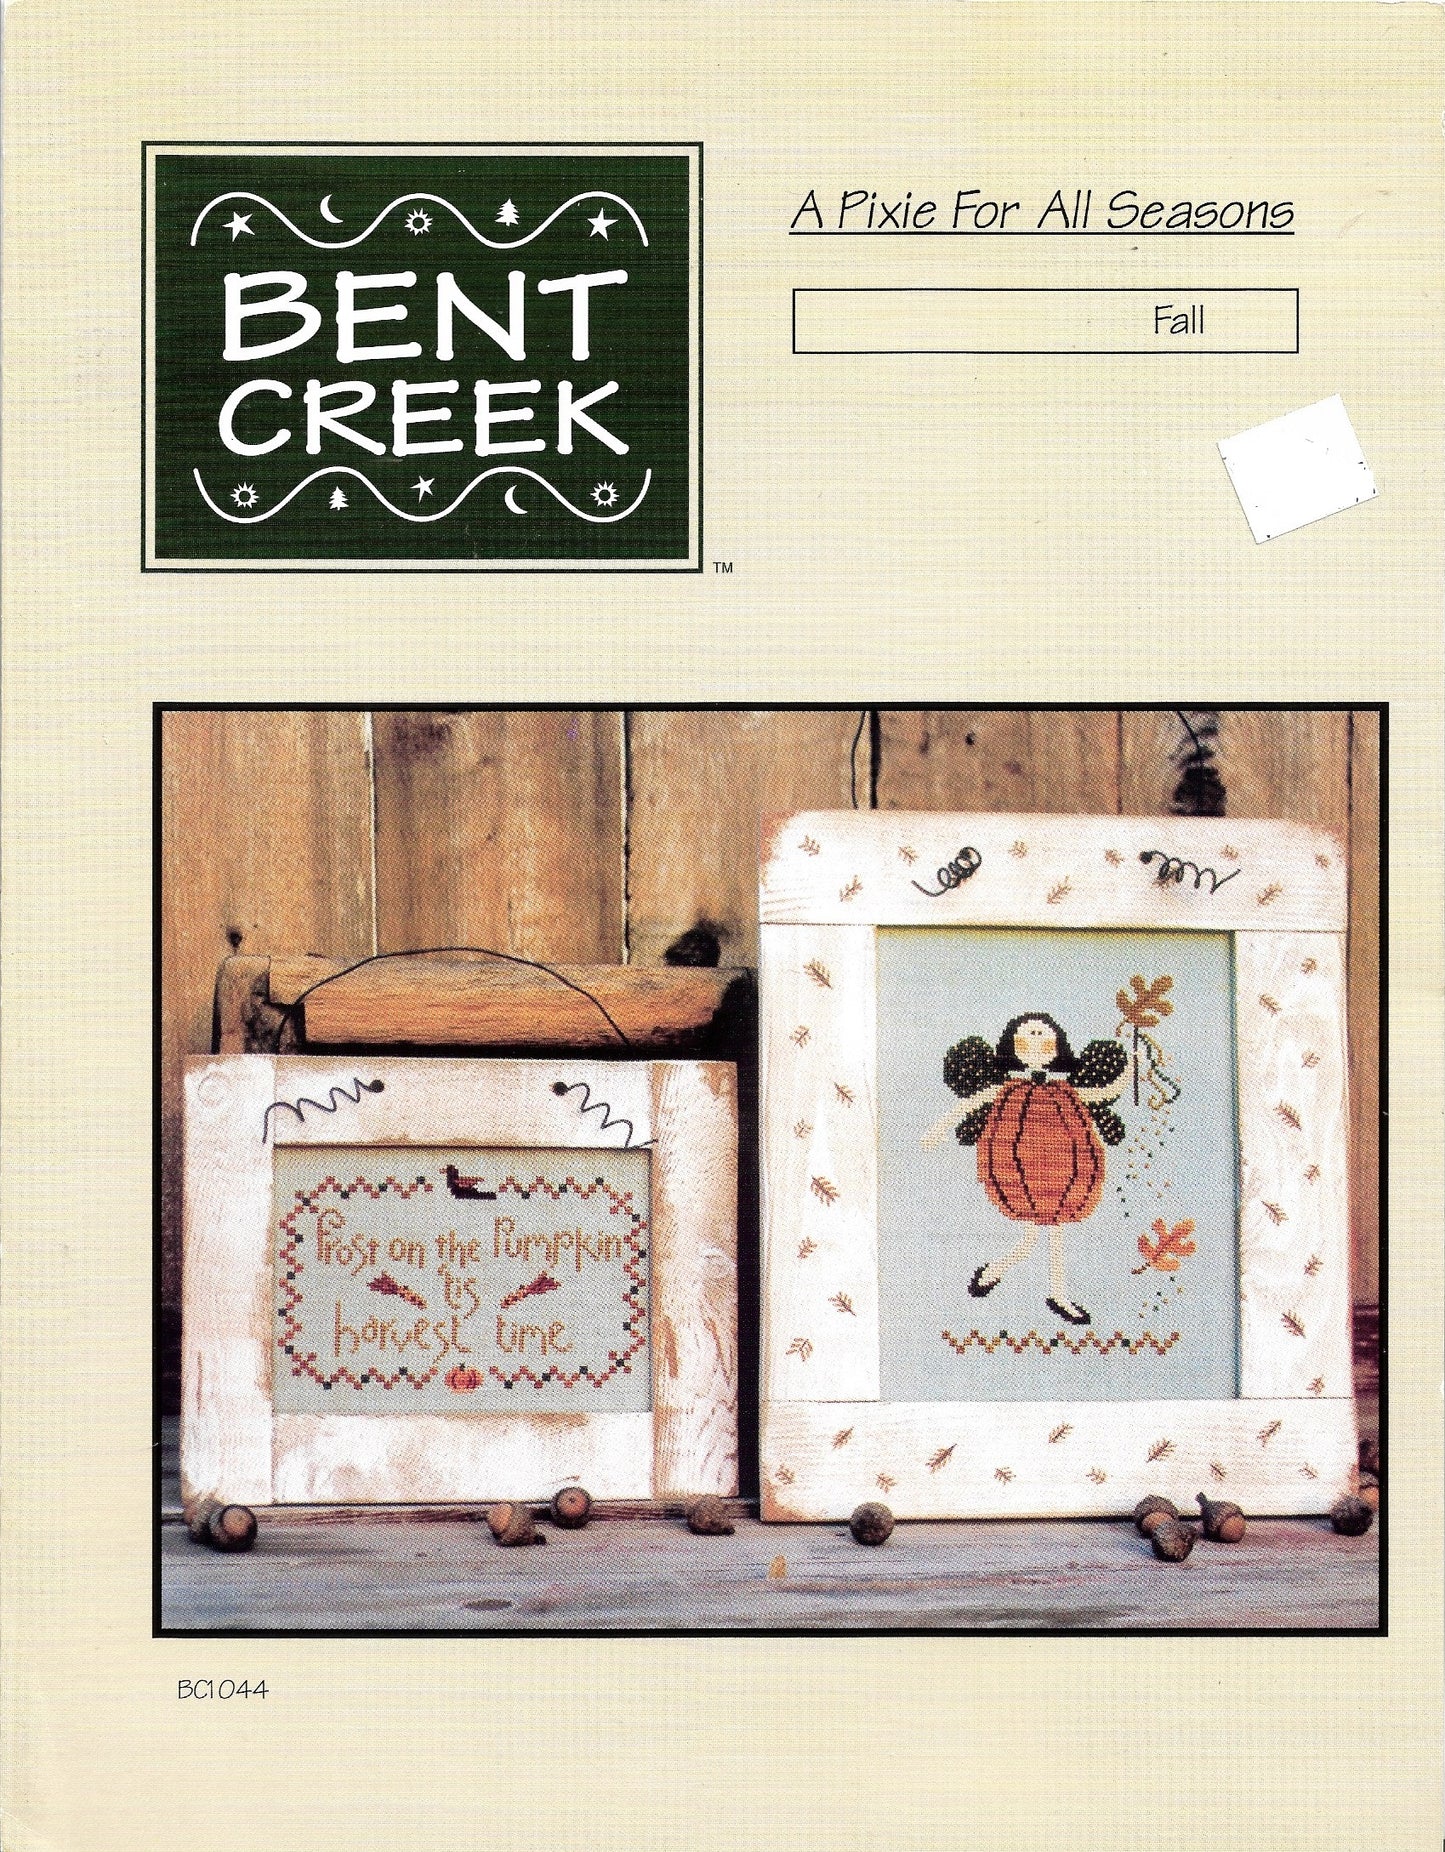 Bent Creek A Pixie For All Seasons - Fall BC1044 cross stitch pattern